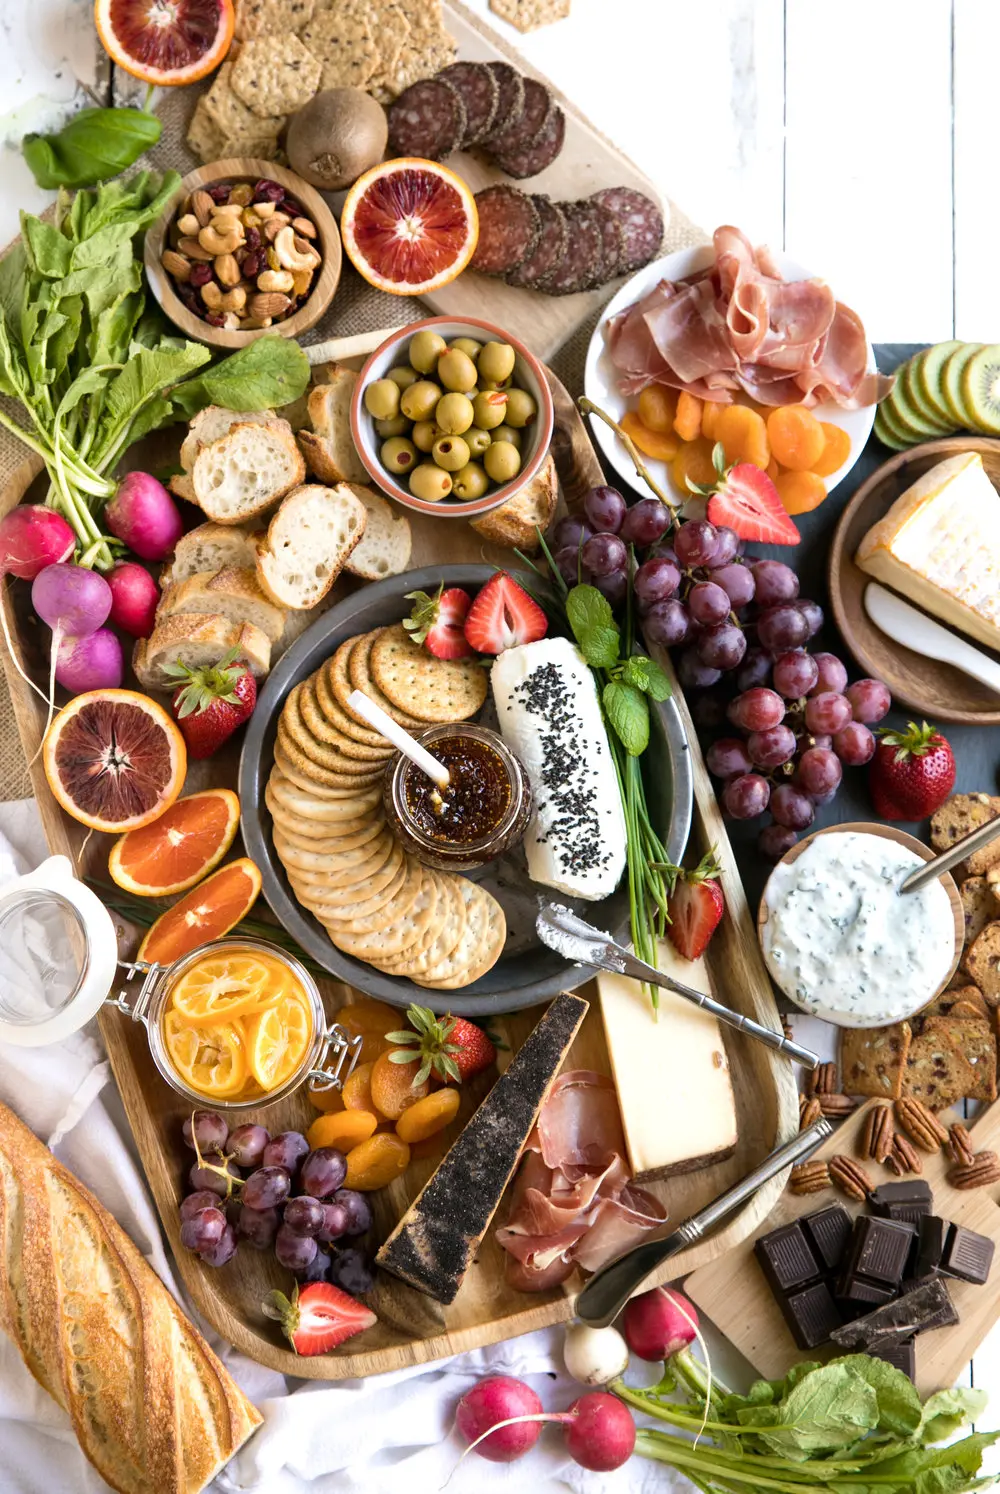 Colorful spring charcuterie board with crackers, fruits, cheeses, olives, and meats.